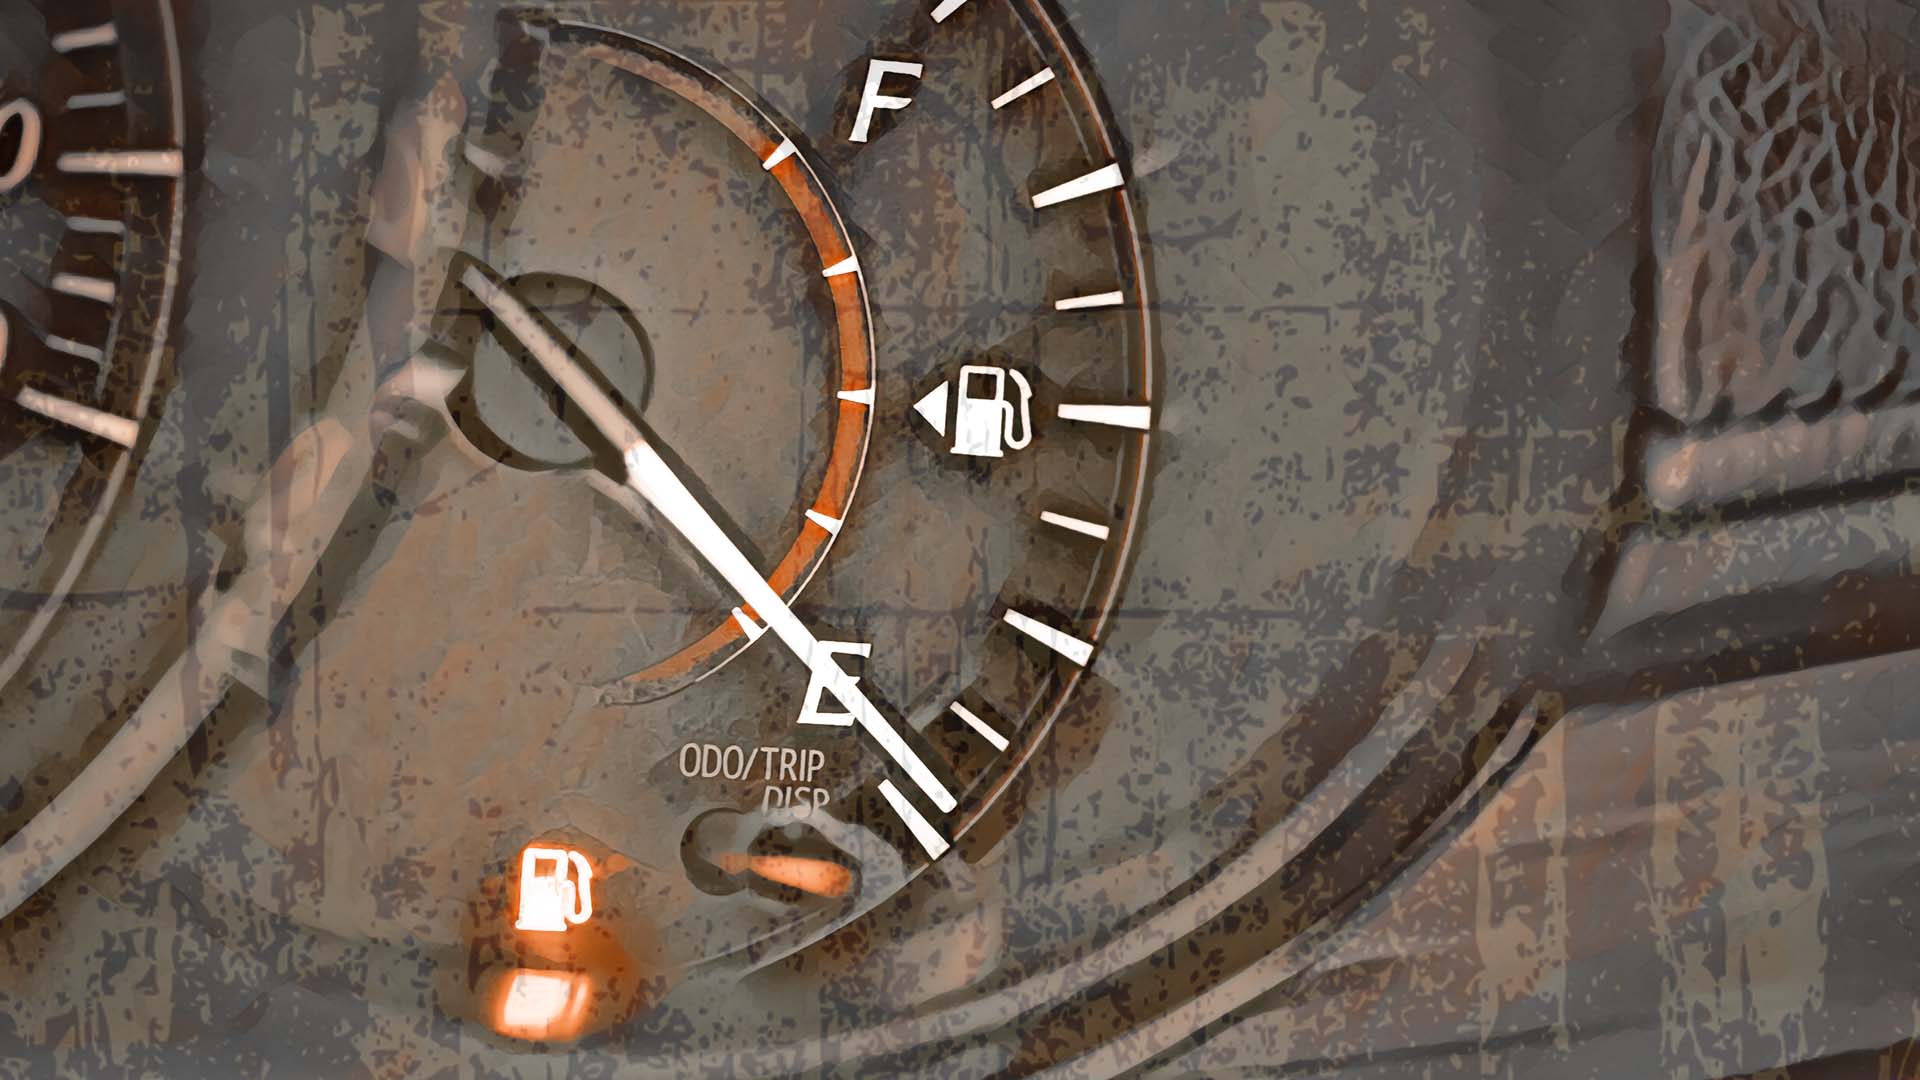 A fuel gauge's needle is on empty, indicating a possible no-gas situation.